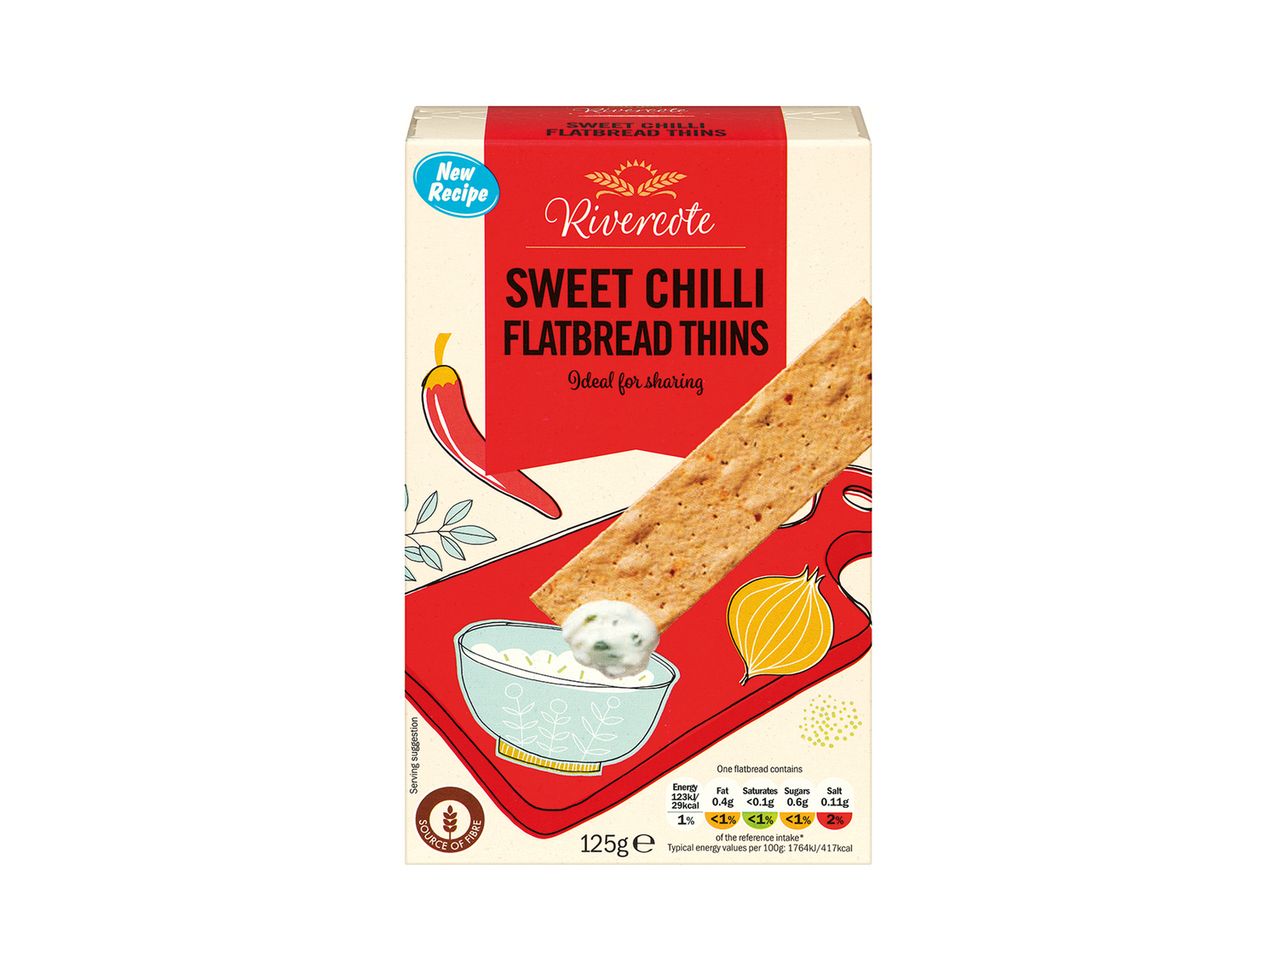 Go to full screen view: Rivercote Flatbread Thins - Image 2